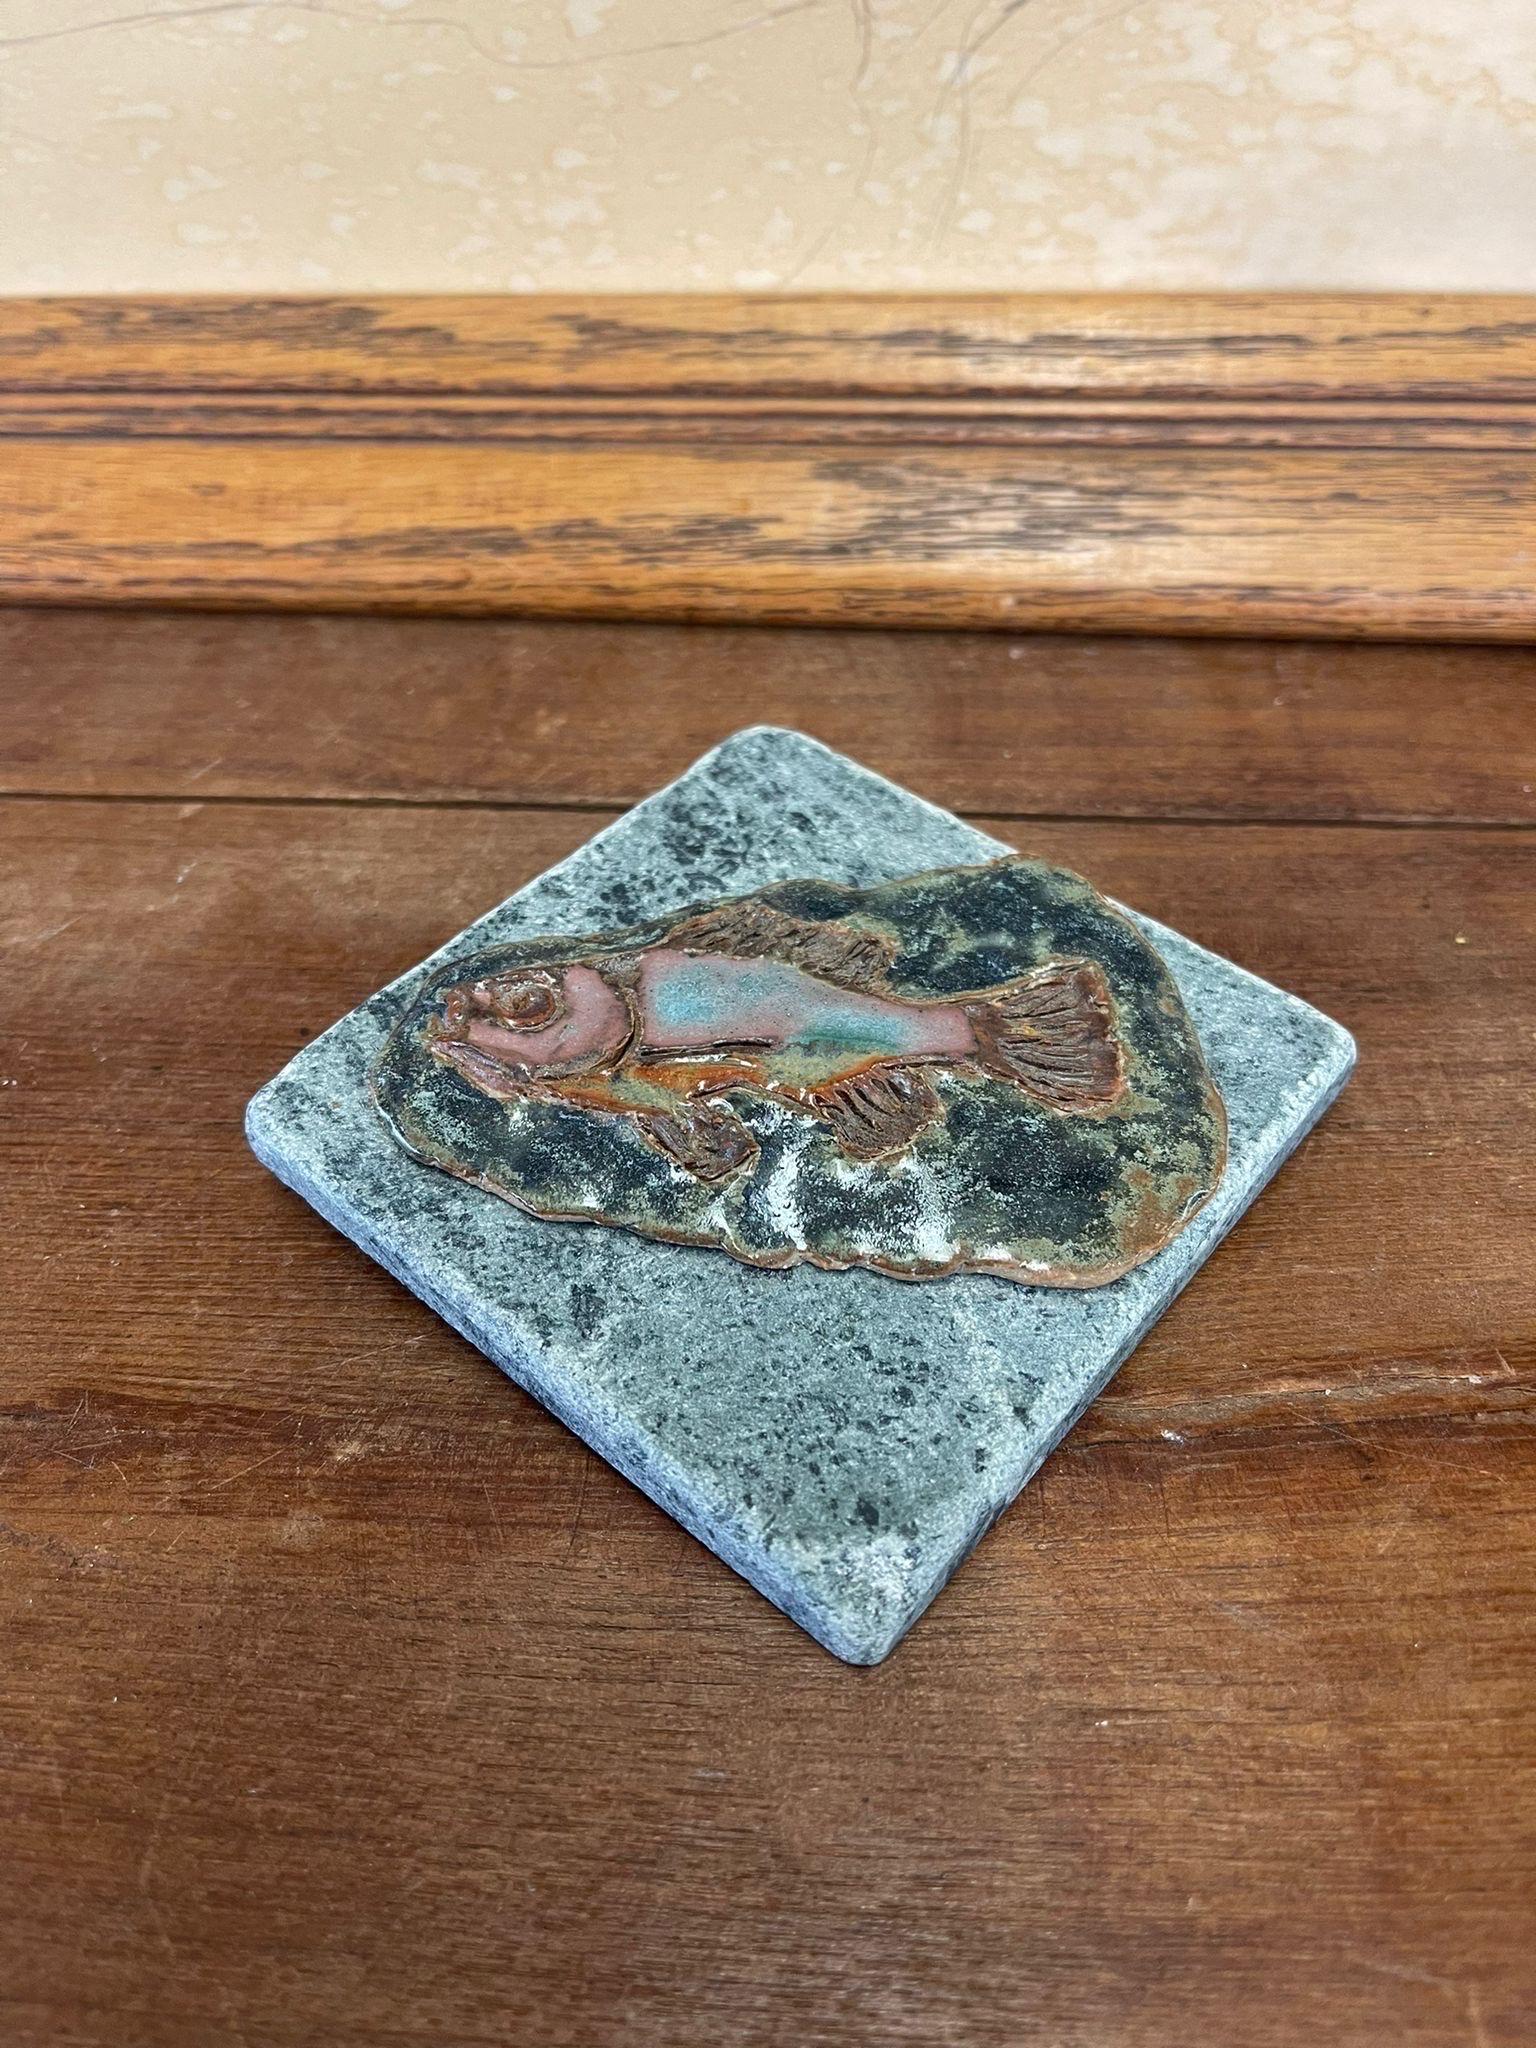 Mid-Century Modern Vintage Tile Decorative Wall Art With Fish Motif. For Sale